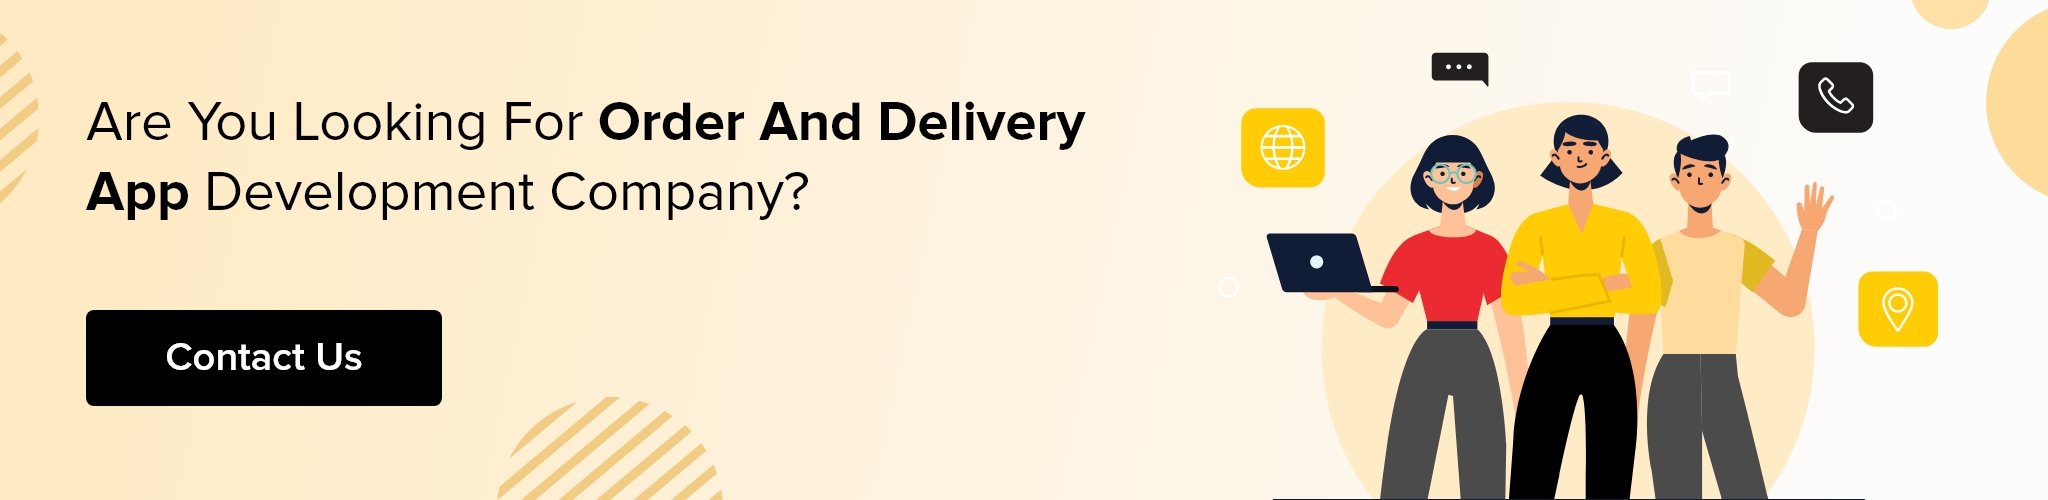 ordering and delivery app developers